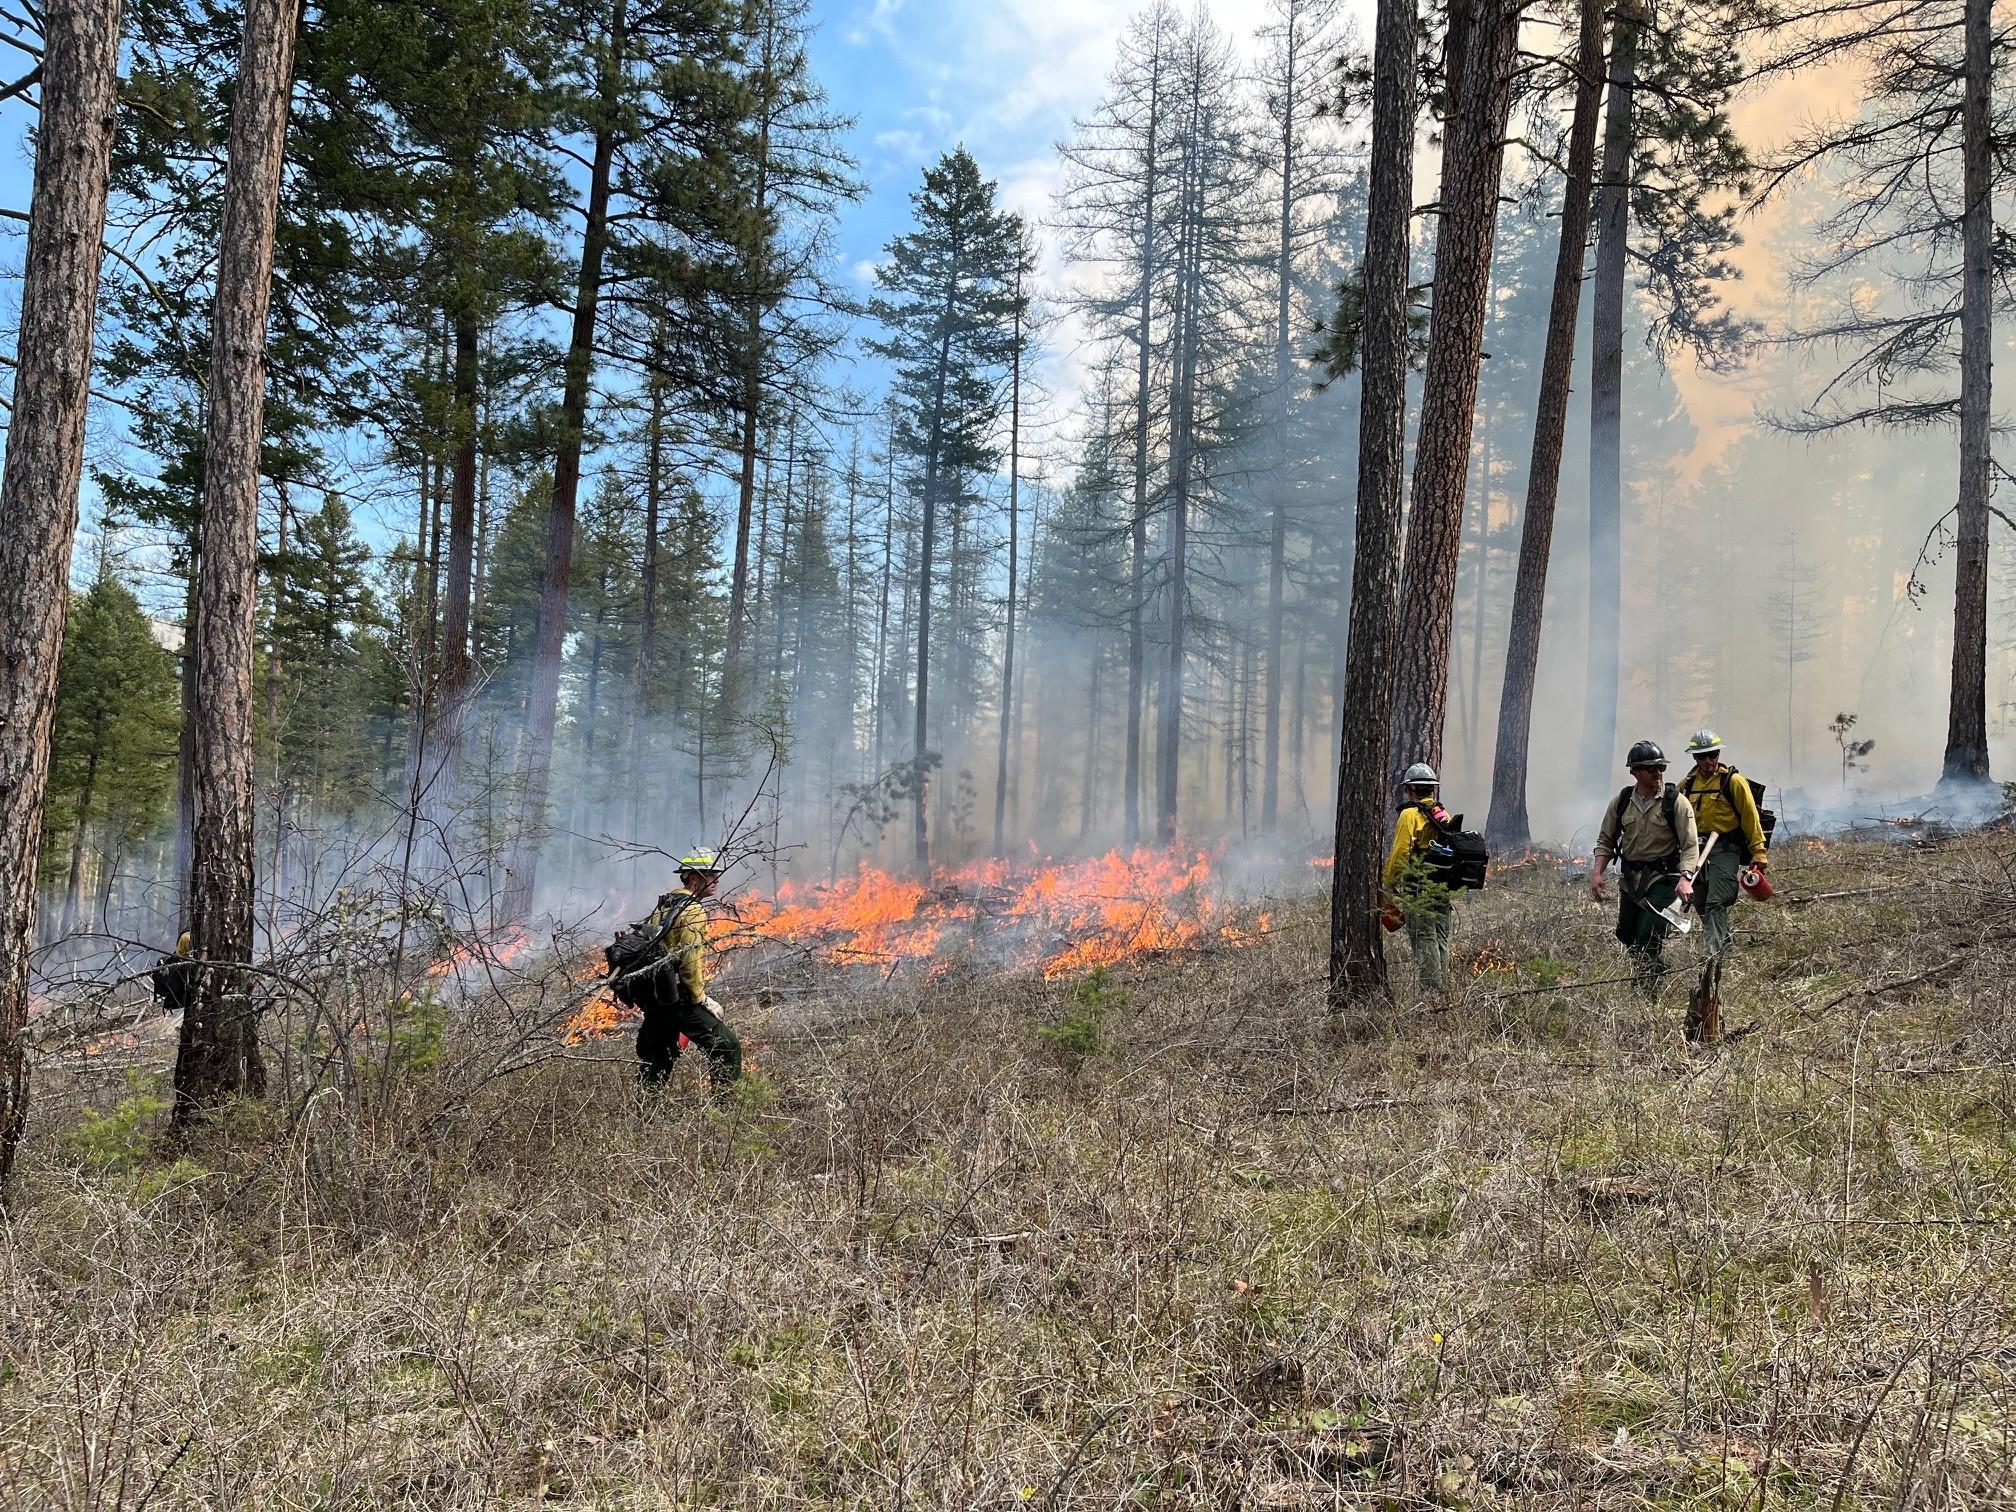 Firefighters with drip torches standing in a conifer forest with smoke and fire in the background